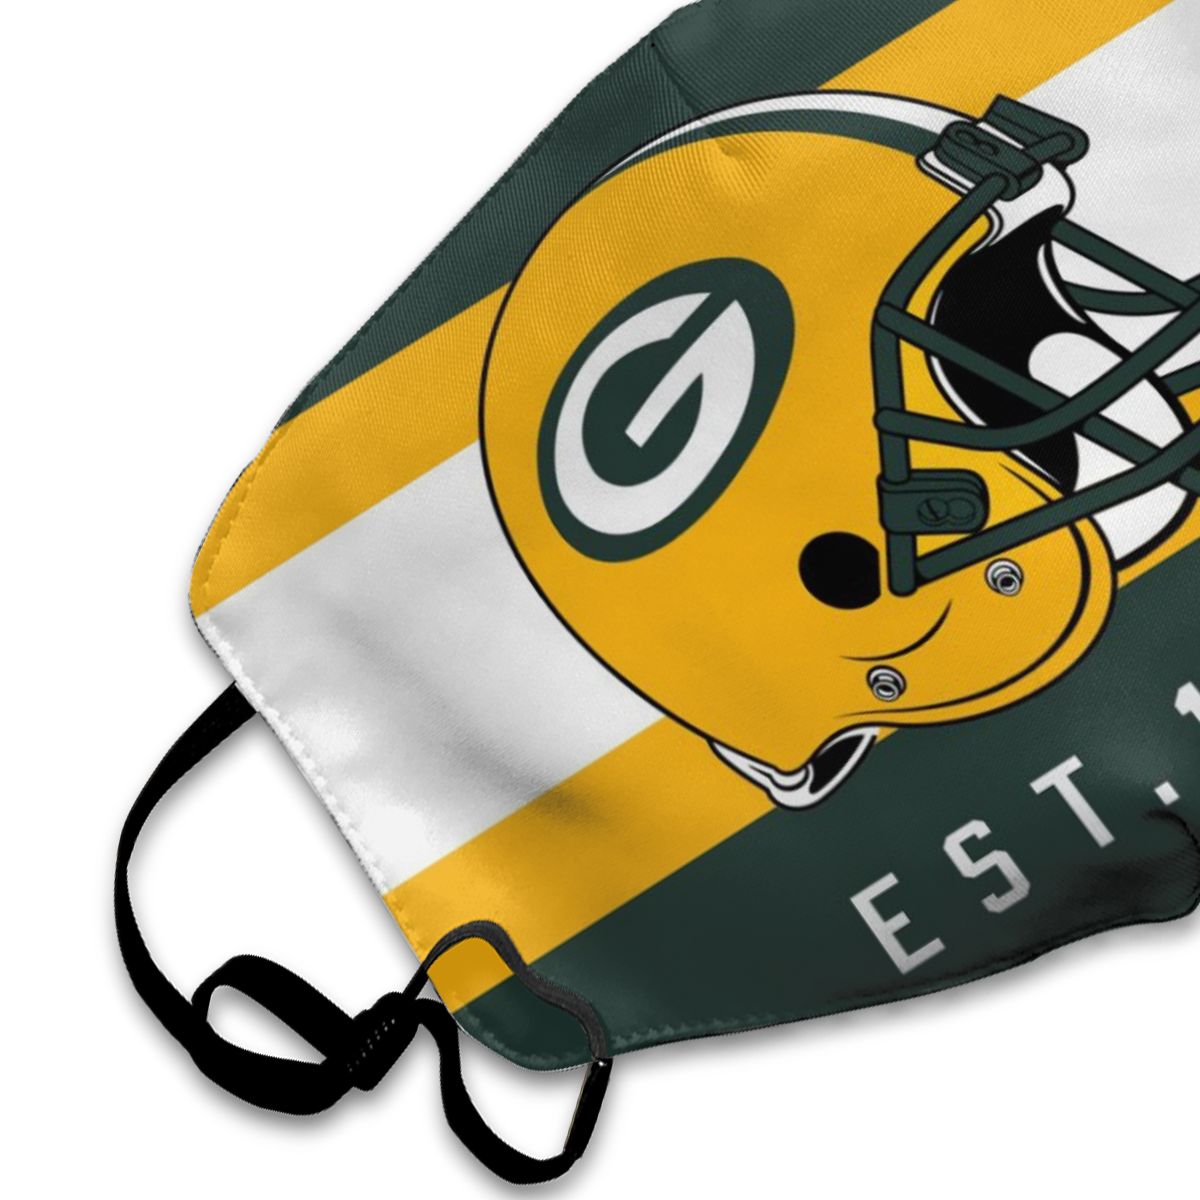 Print Football Personalized Green Bay Packers Dust Masks